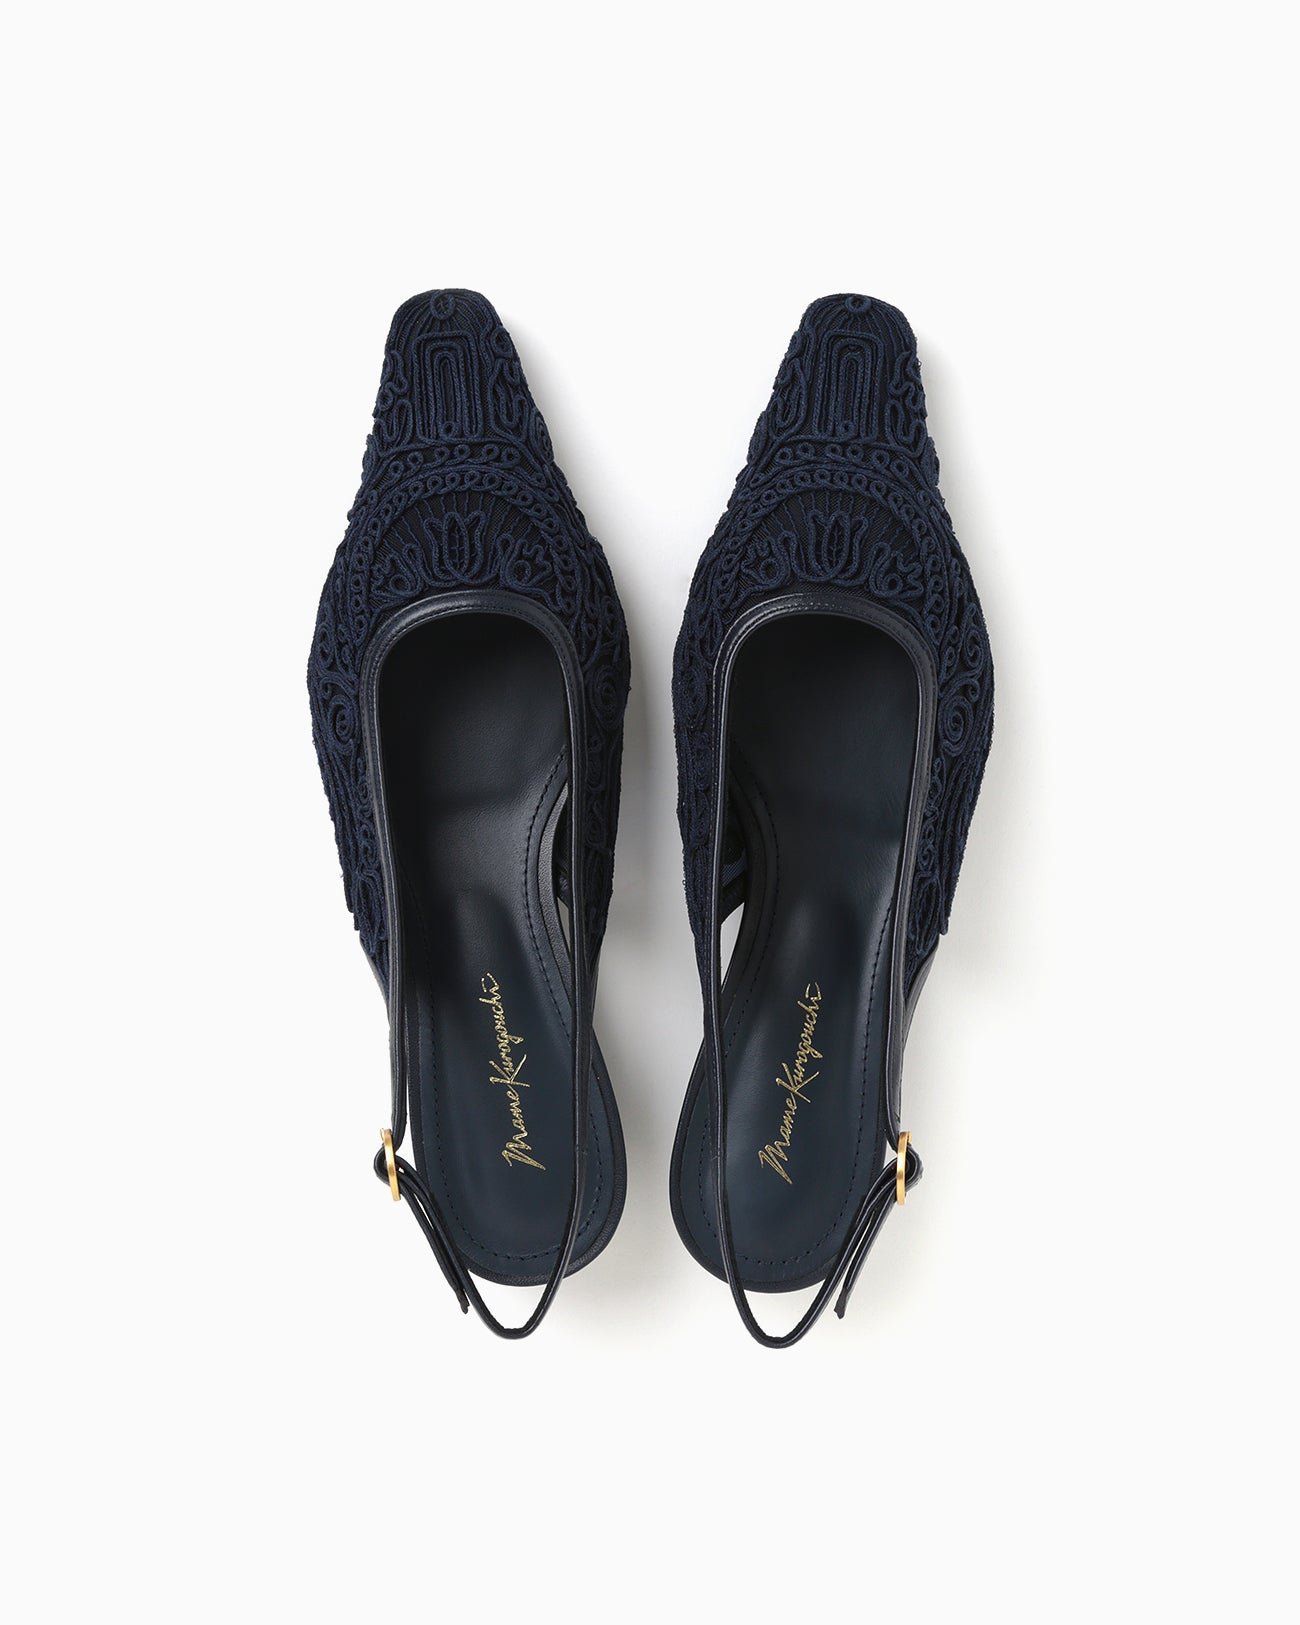 Cording Embroidery Sling Back Heels - navy